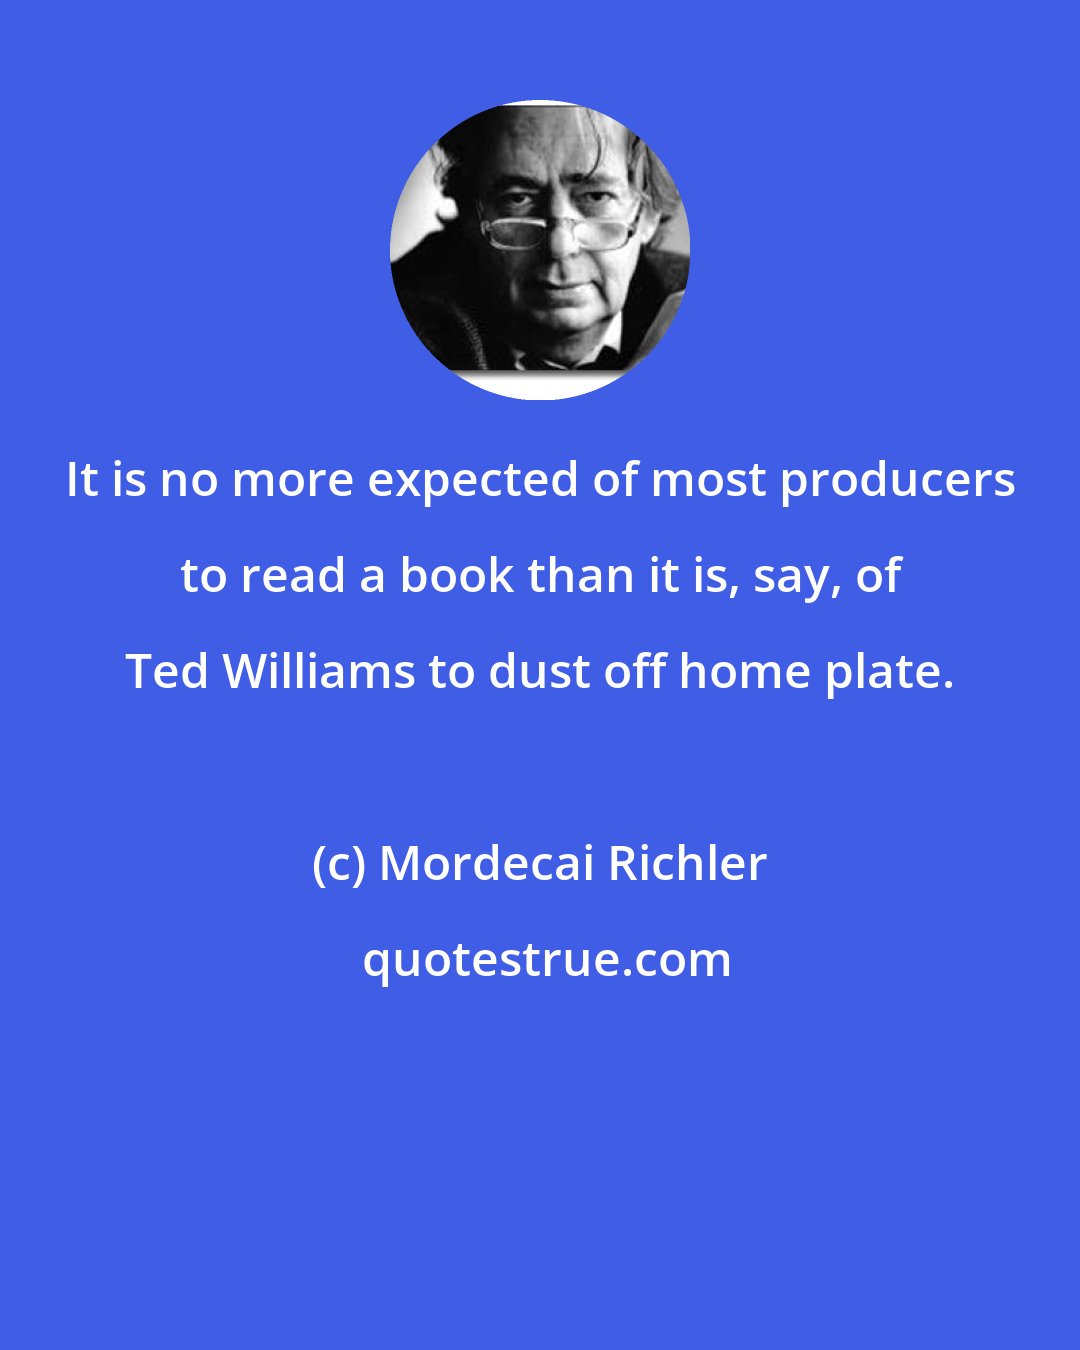 Mordecai Richler: It is no more expected of most producers to read a book than it is, say, of Ted Williams to dust off home plate.